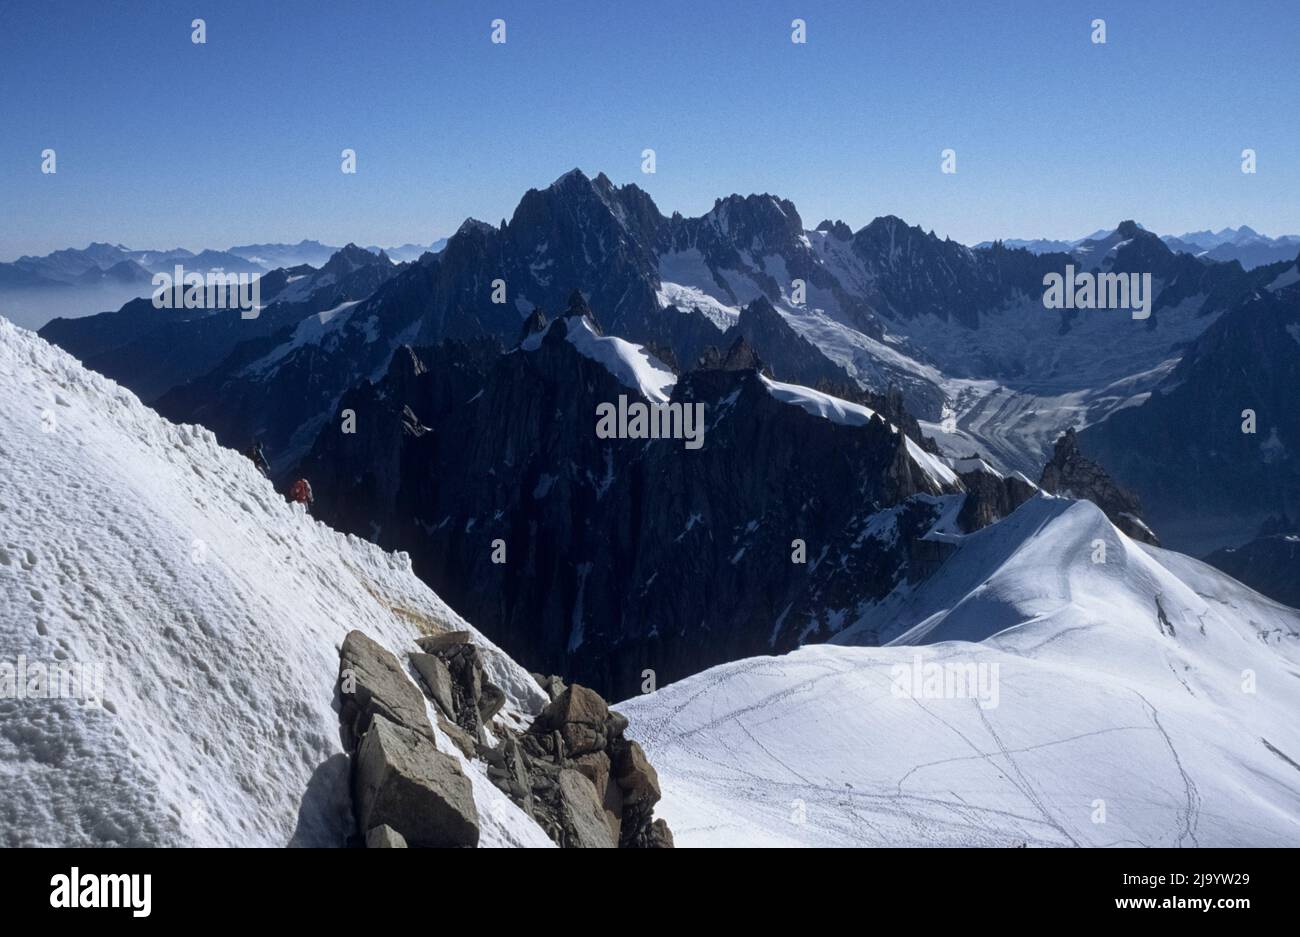 View from the Aiguille du Midi over firn fields with the tracks of many mountaineers towards the Glacier de Talèfre. Chamonix Mont Blanc, France, 1990 Stock Photo